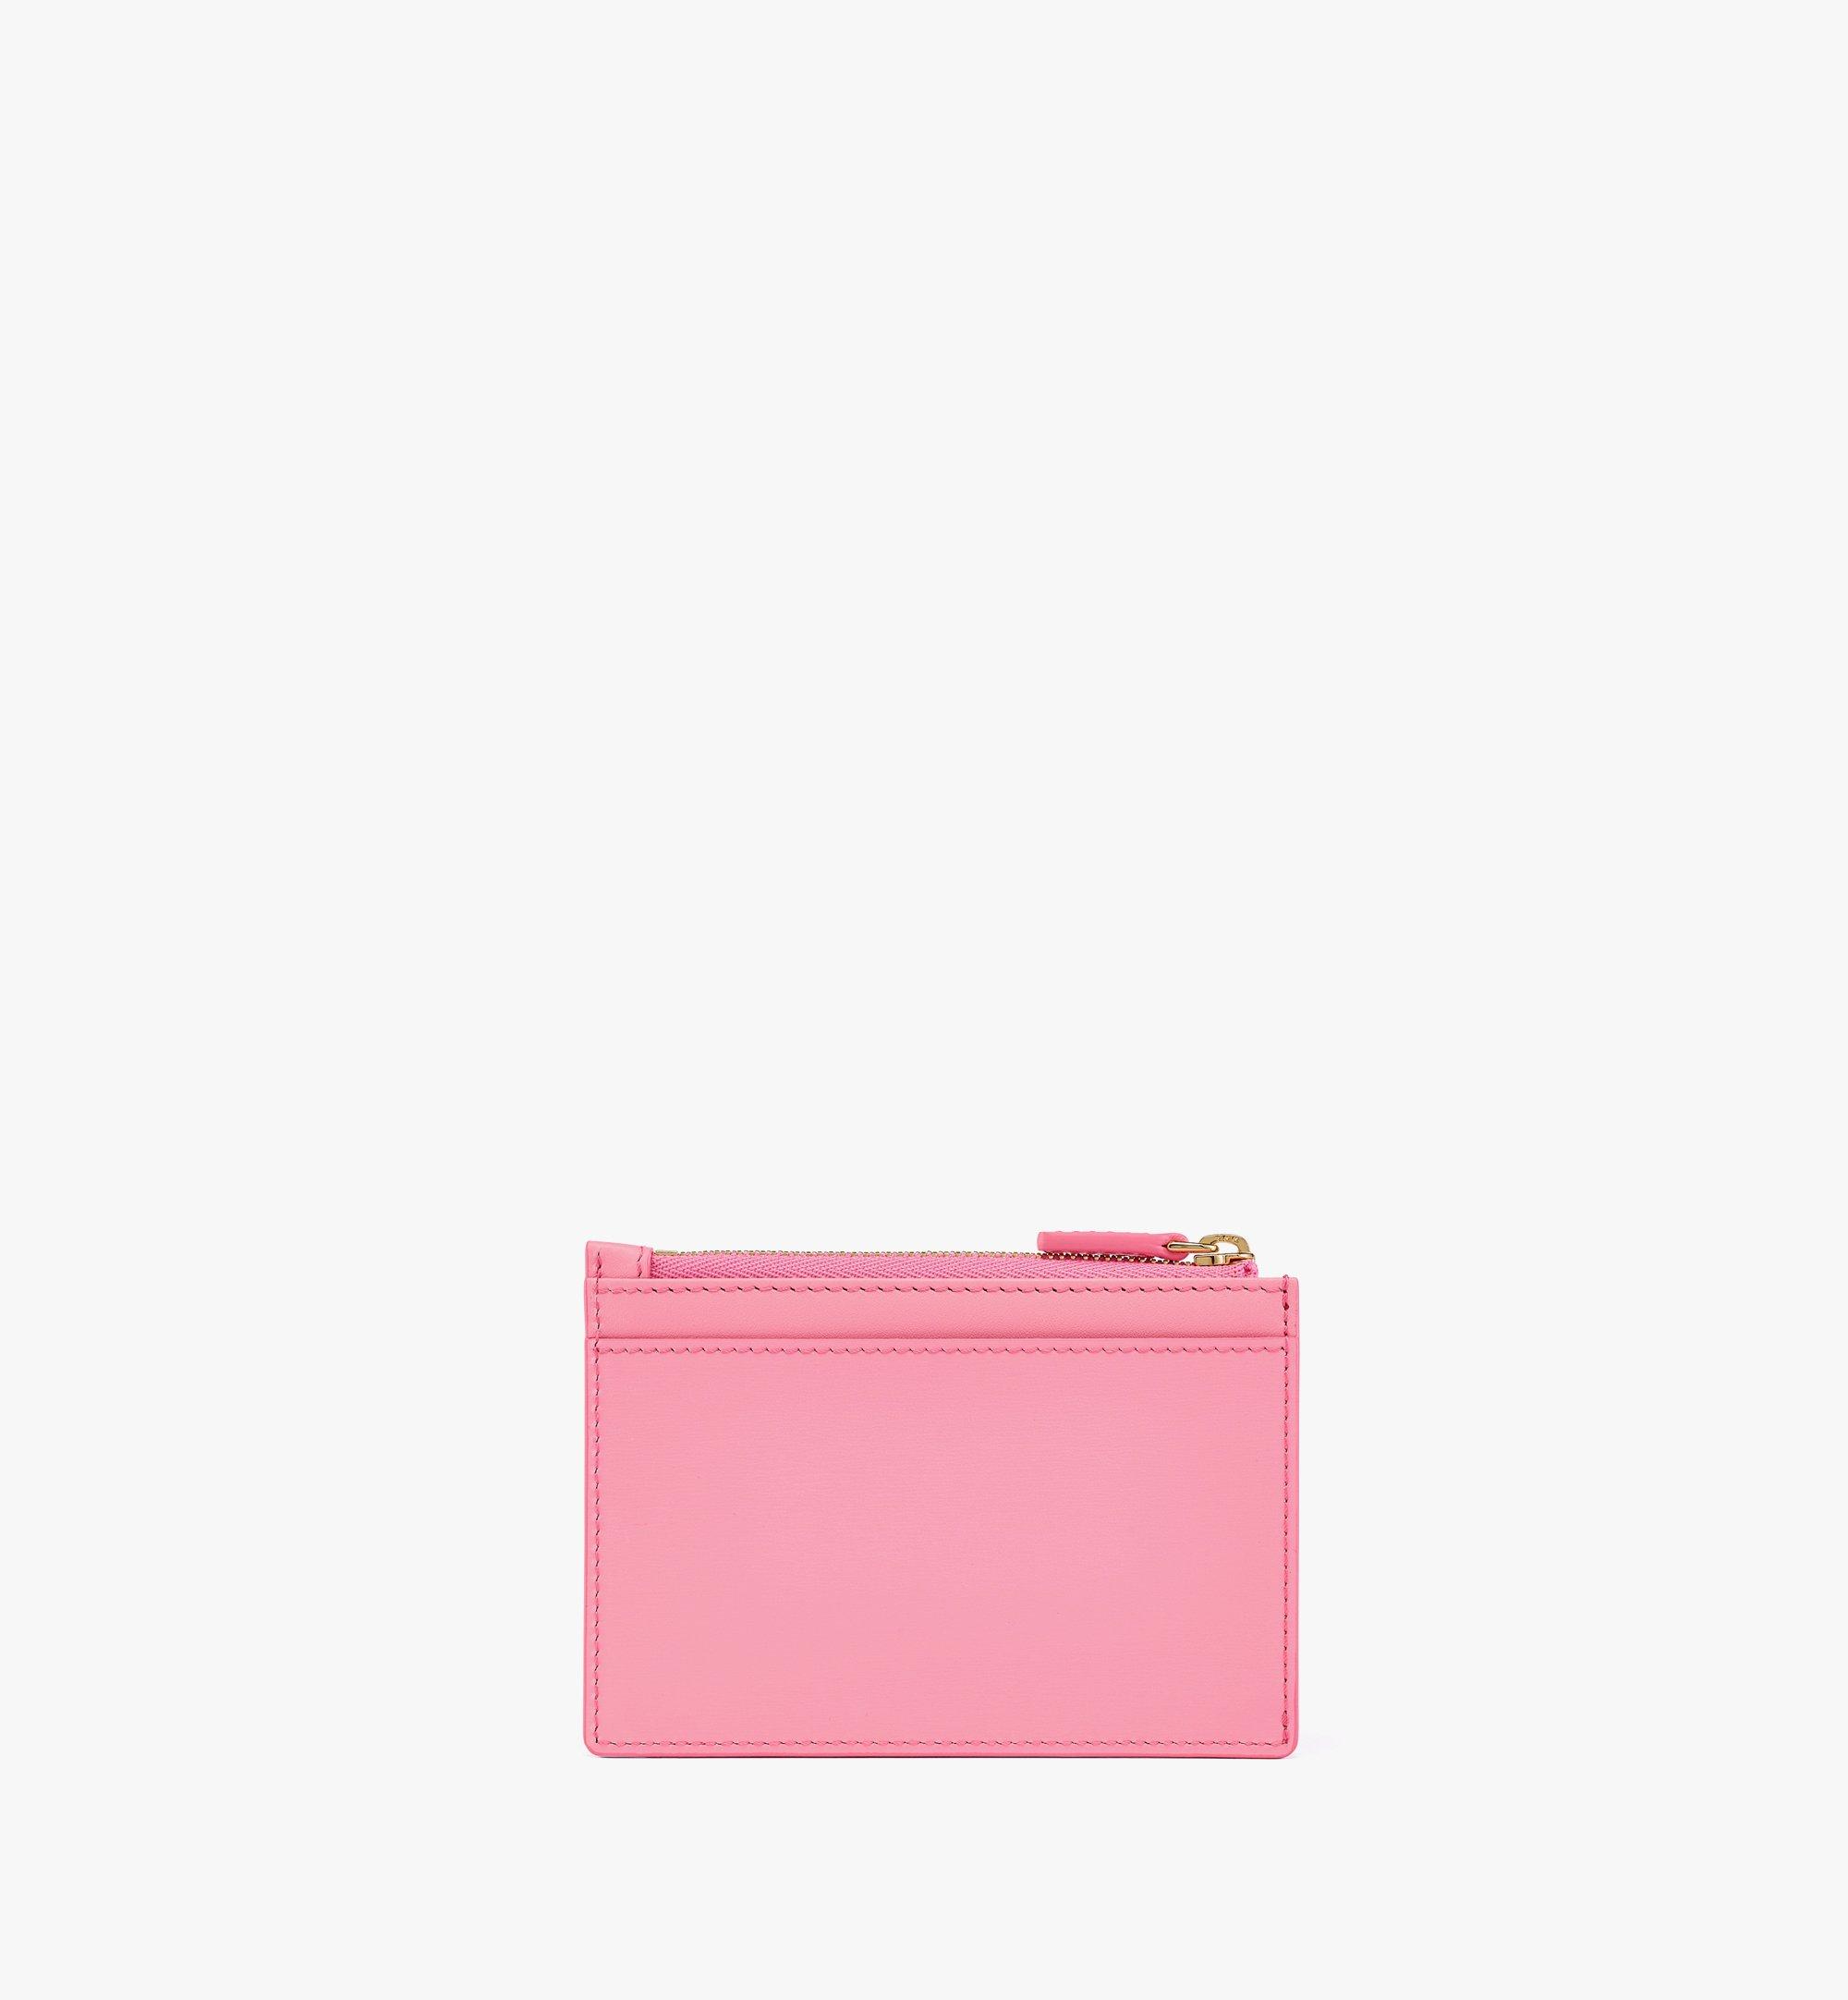 MCM Patricia Card Case in Spanish Leather Pink MYACSPA02QV001 Alternate View 2